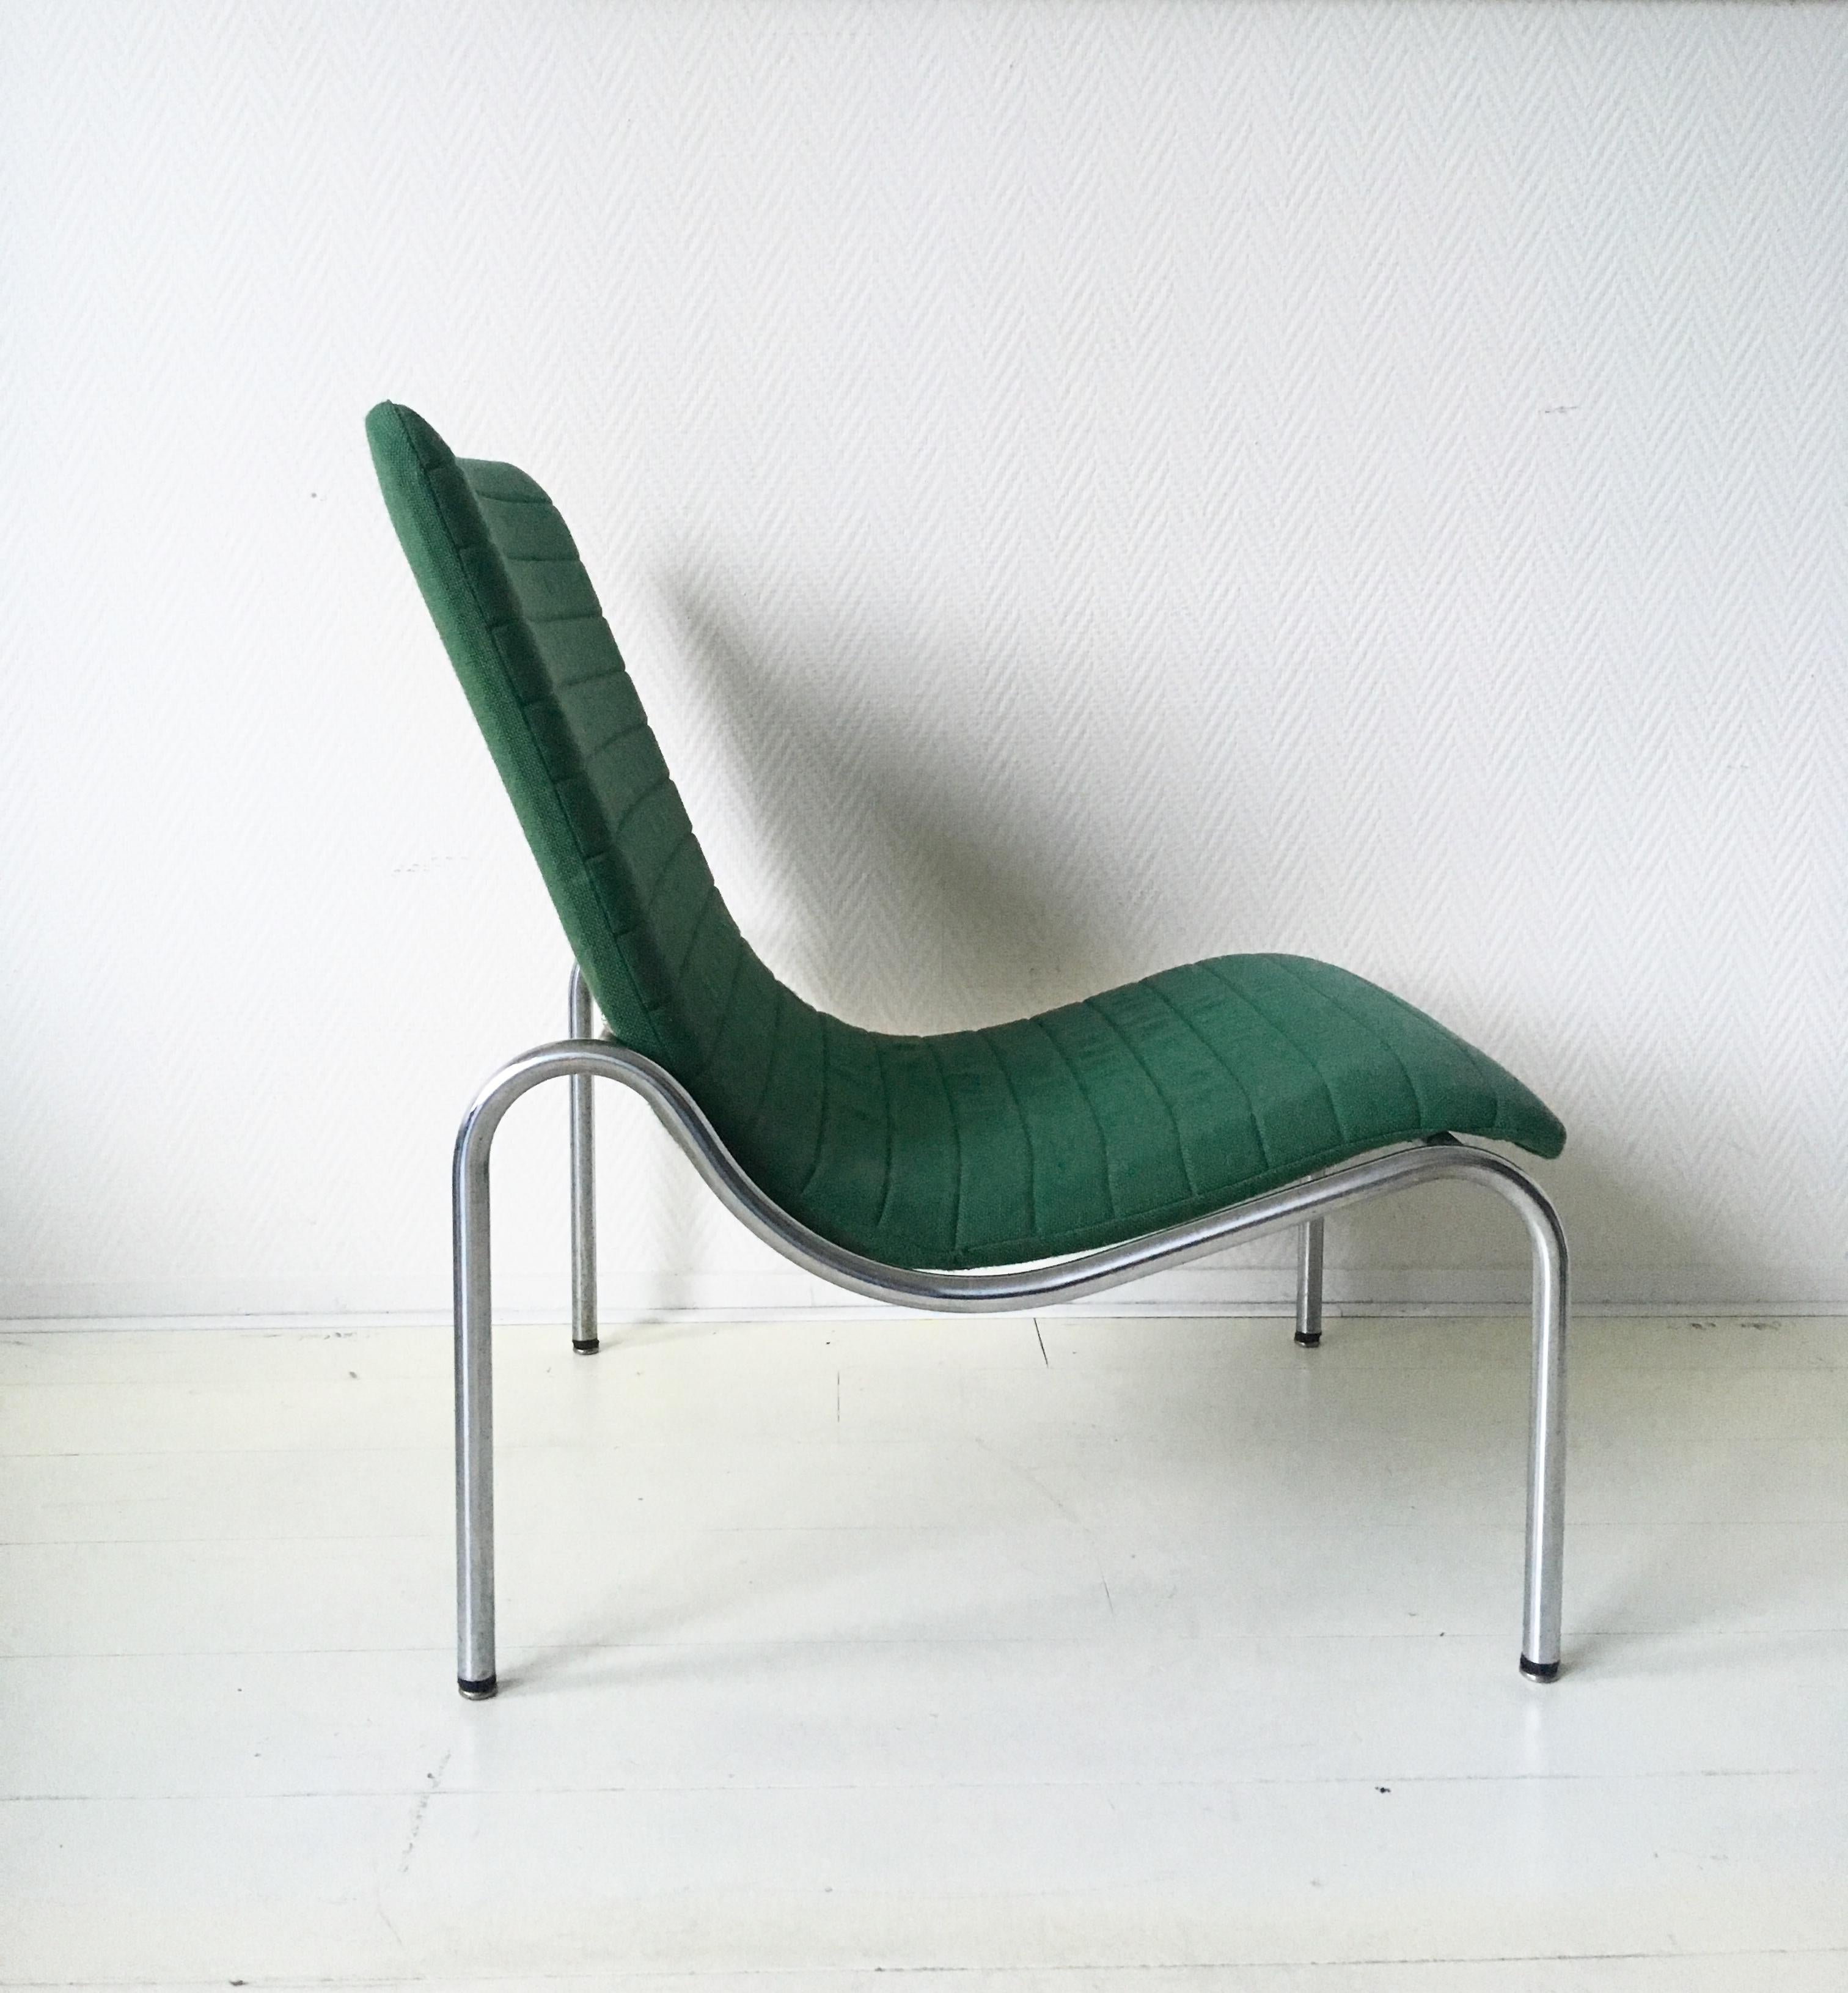 Green Tubular Lounge Chair by Kho Liang Ie for Stabin Holland, Model 703, 1968 In Good Condition For Sale In Schagen, NL